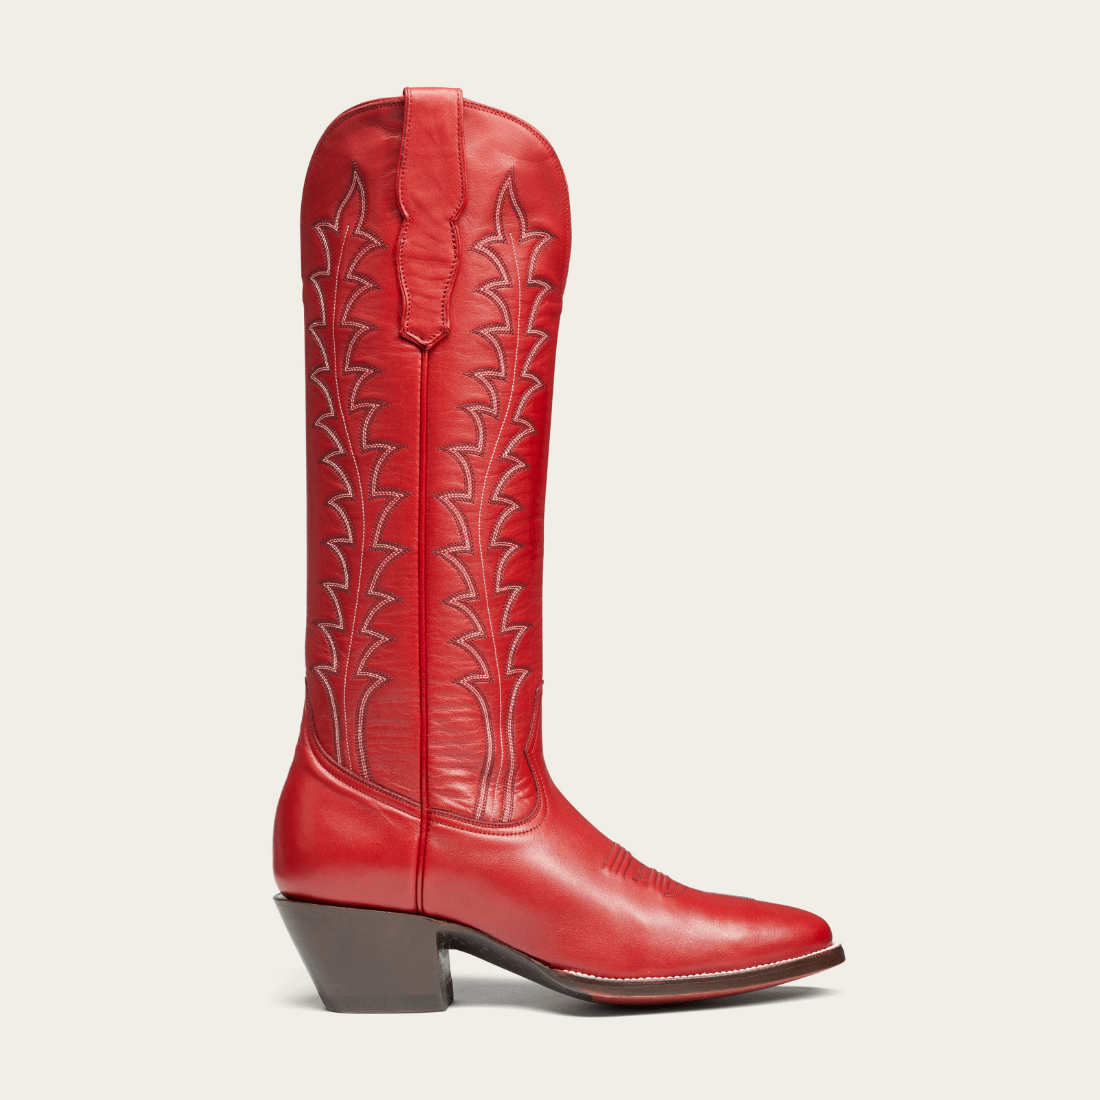 CITY Boots Georgia Women's Red Cowboy Boots - CITY Boots